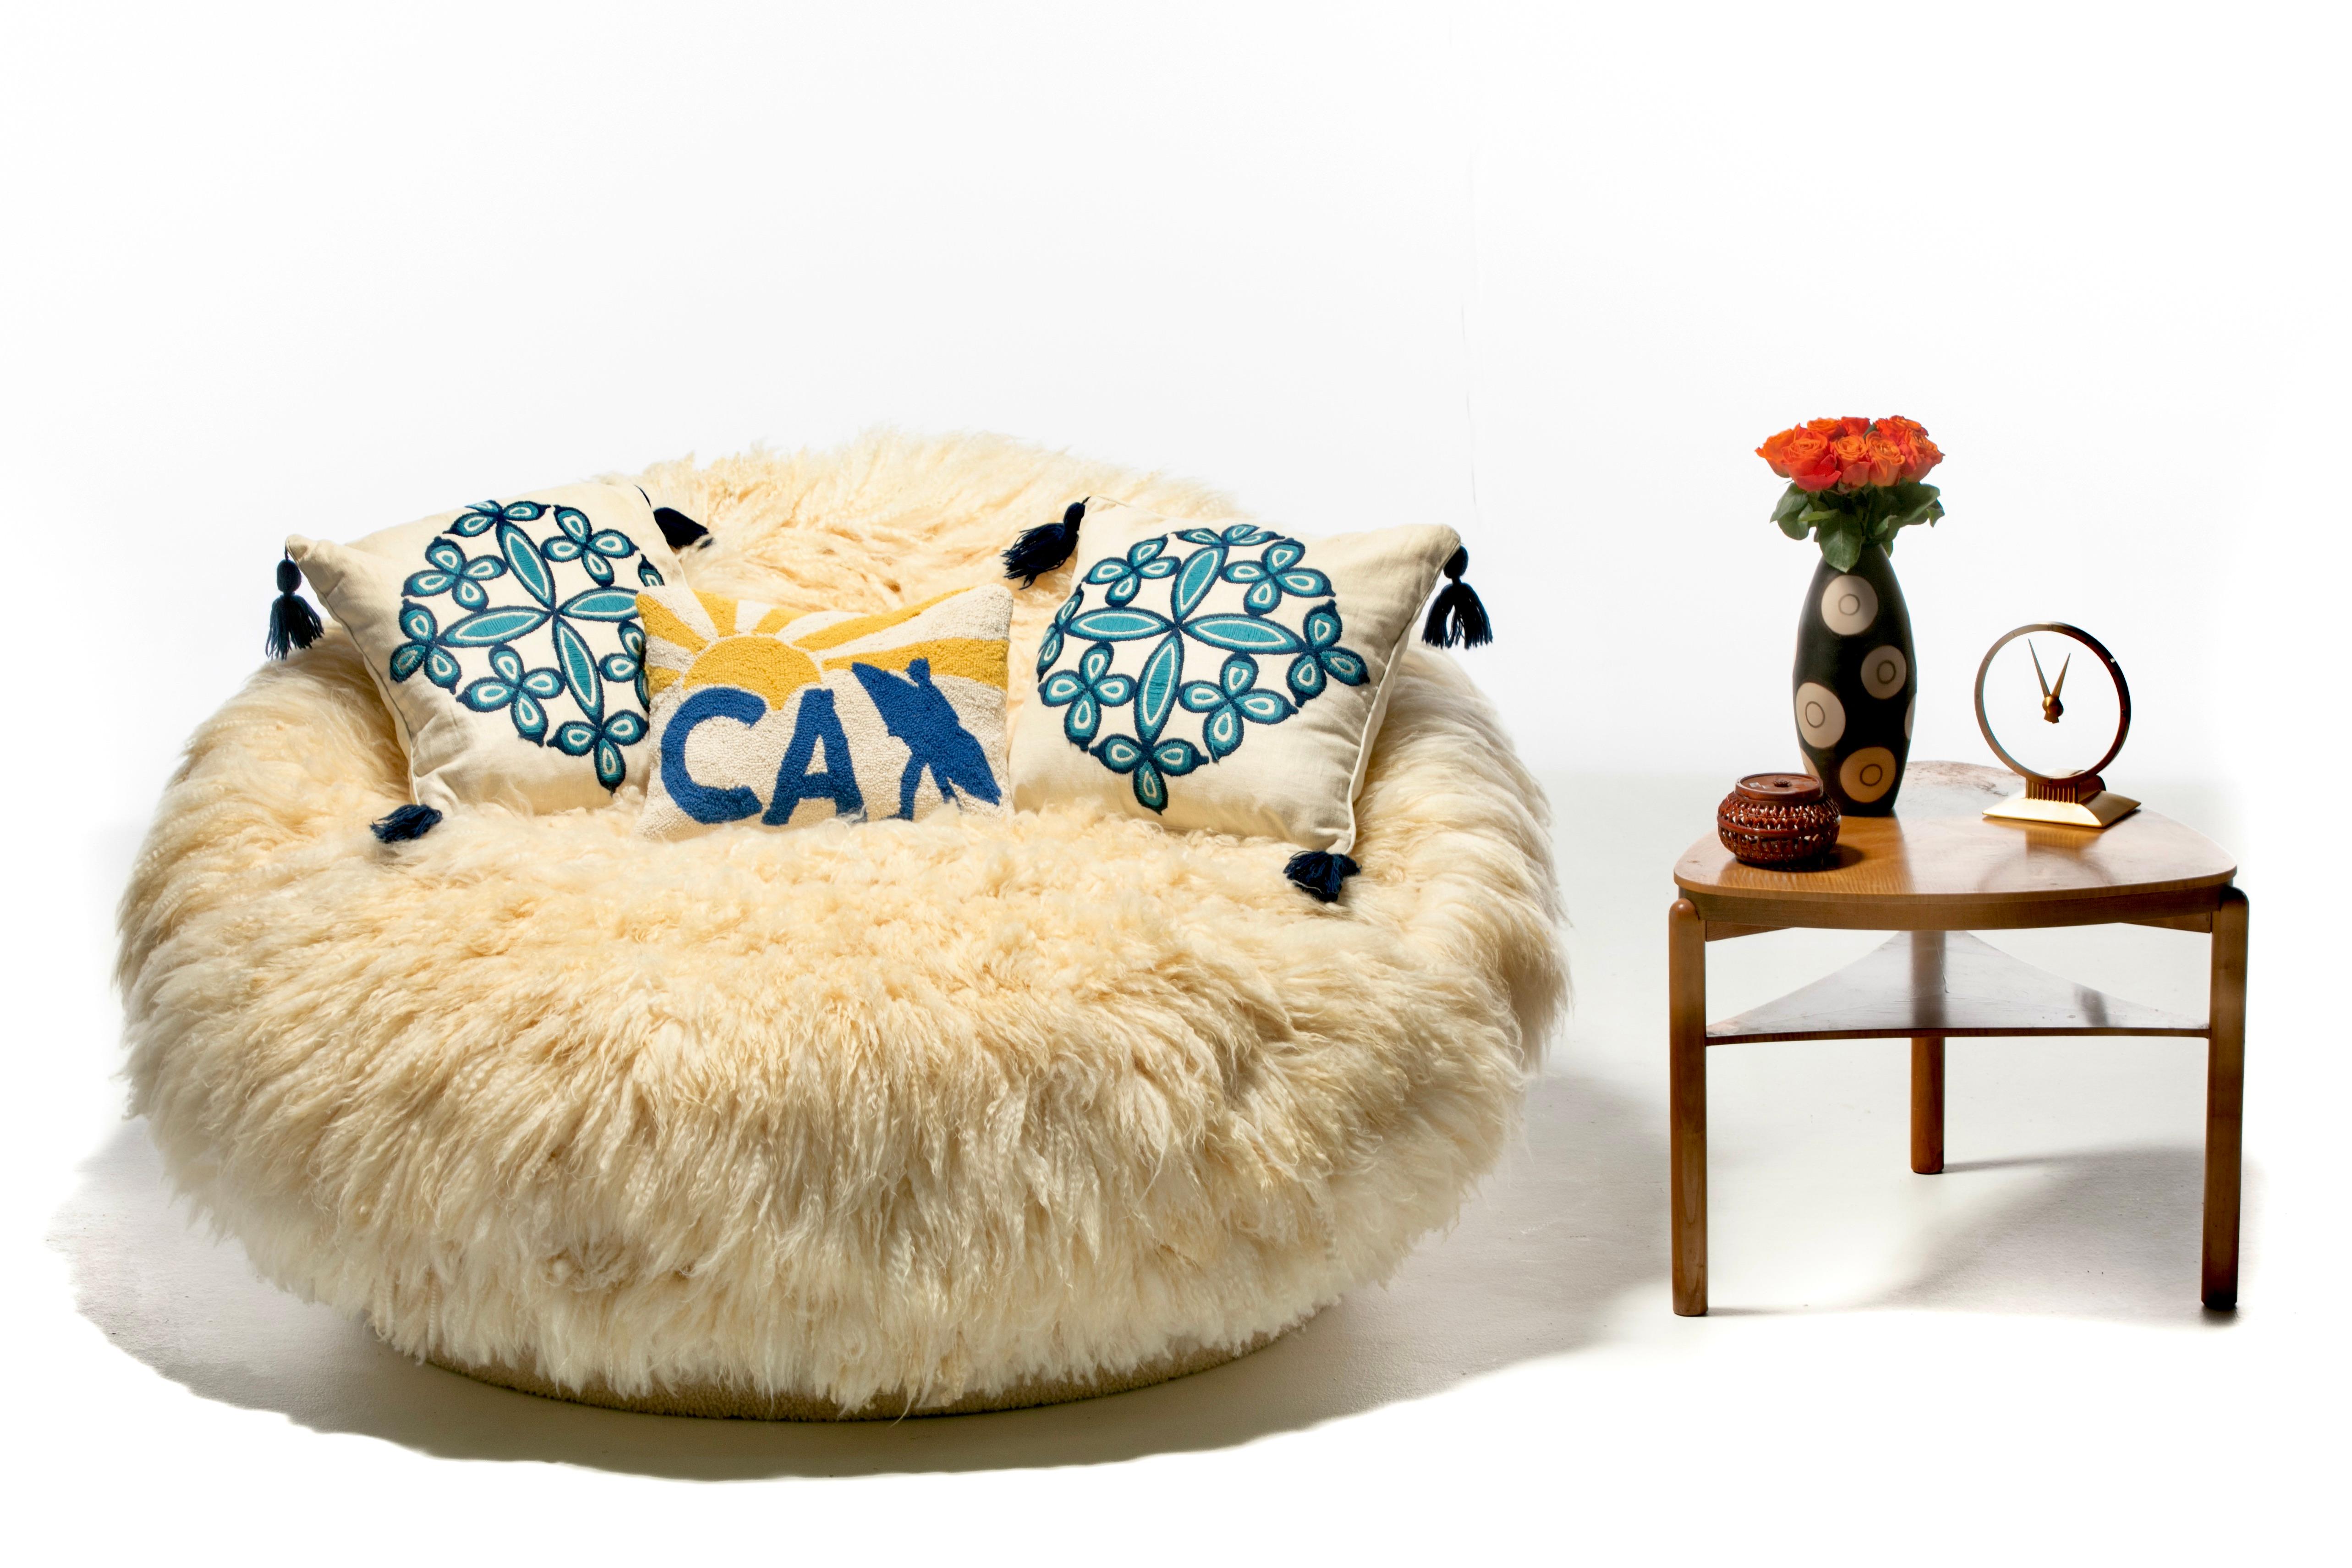 Let most famous Mid Century Modern Designer Milo Baughman take you up in space in this big 1960s Satellite Chair covered in new luxuriously soft Napa Valley Sheepskins and Ivory Shearling. Hand sewn sheepskin hides. Comfy to snuggle with your